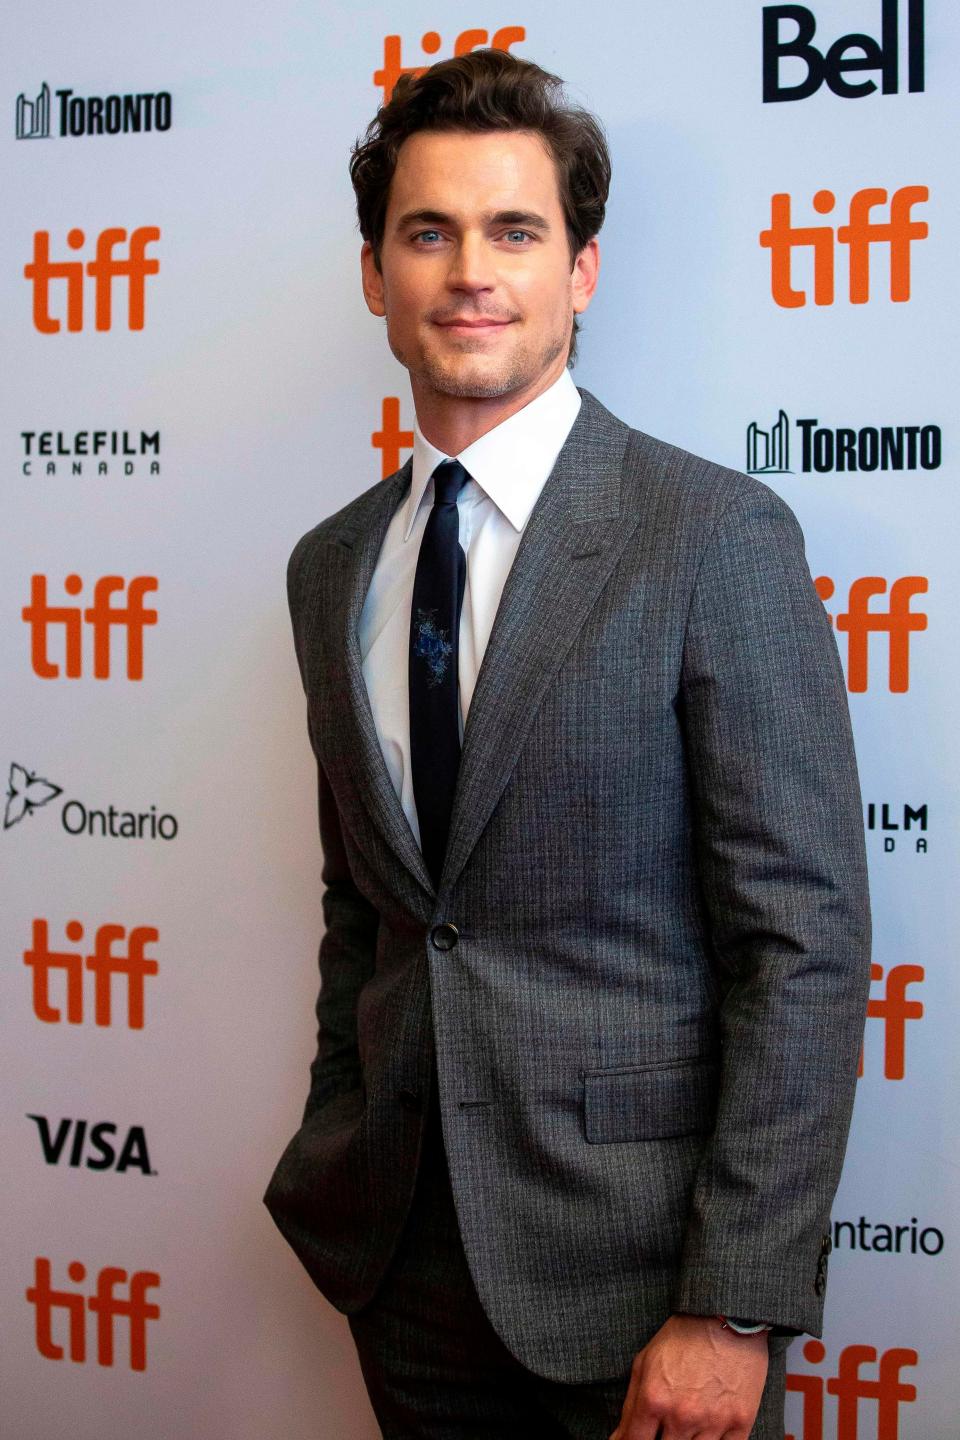 Matt Bomer, who starred in "American Horror Story: Hotel" returns as Michael in the spinoff series.